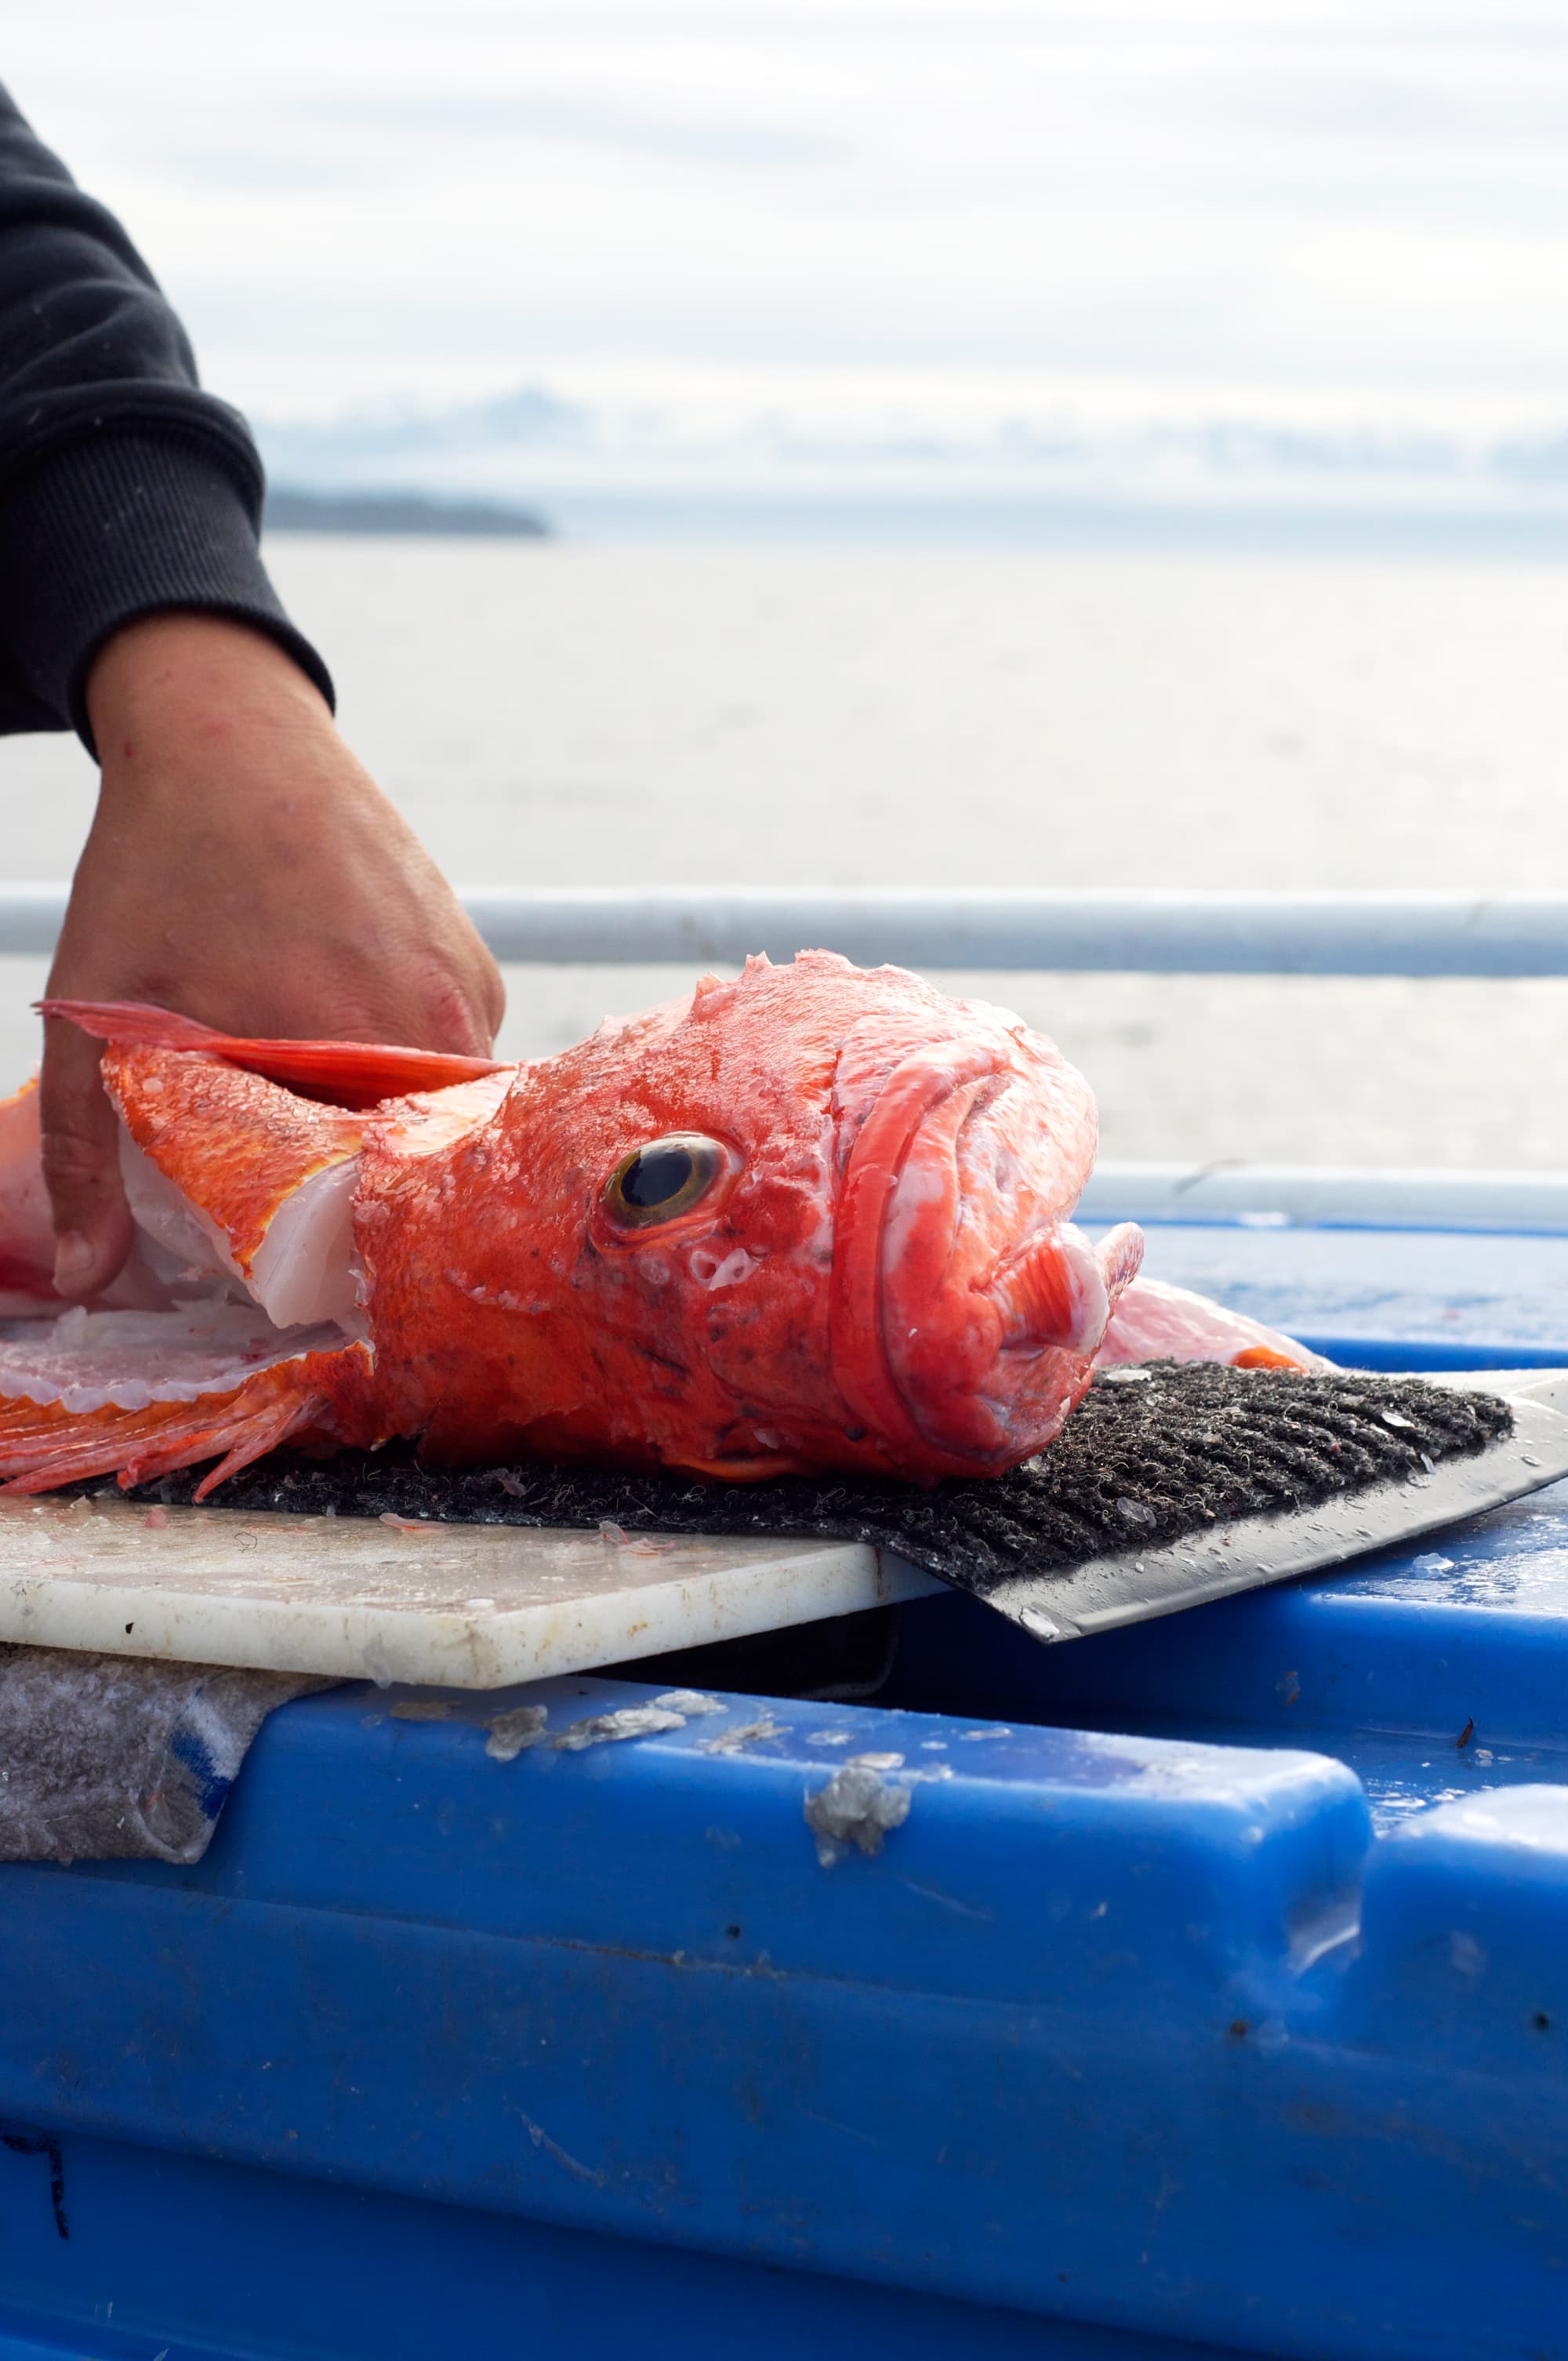 Live Red Snapper Fish Cutting  Amazing Fisherman Skills in India 